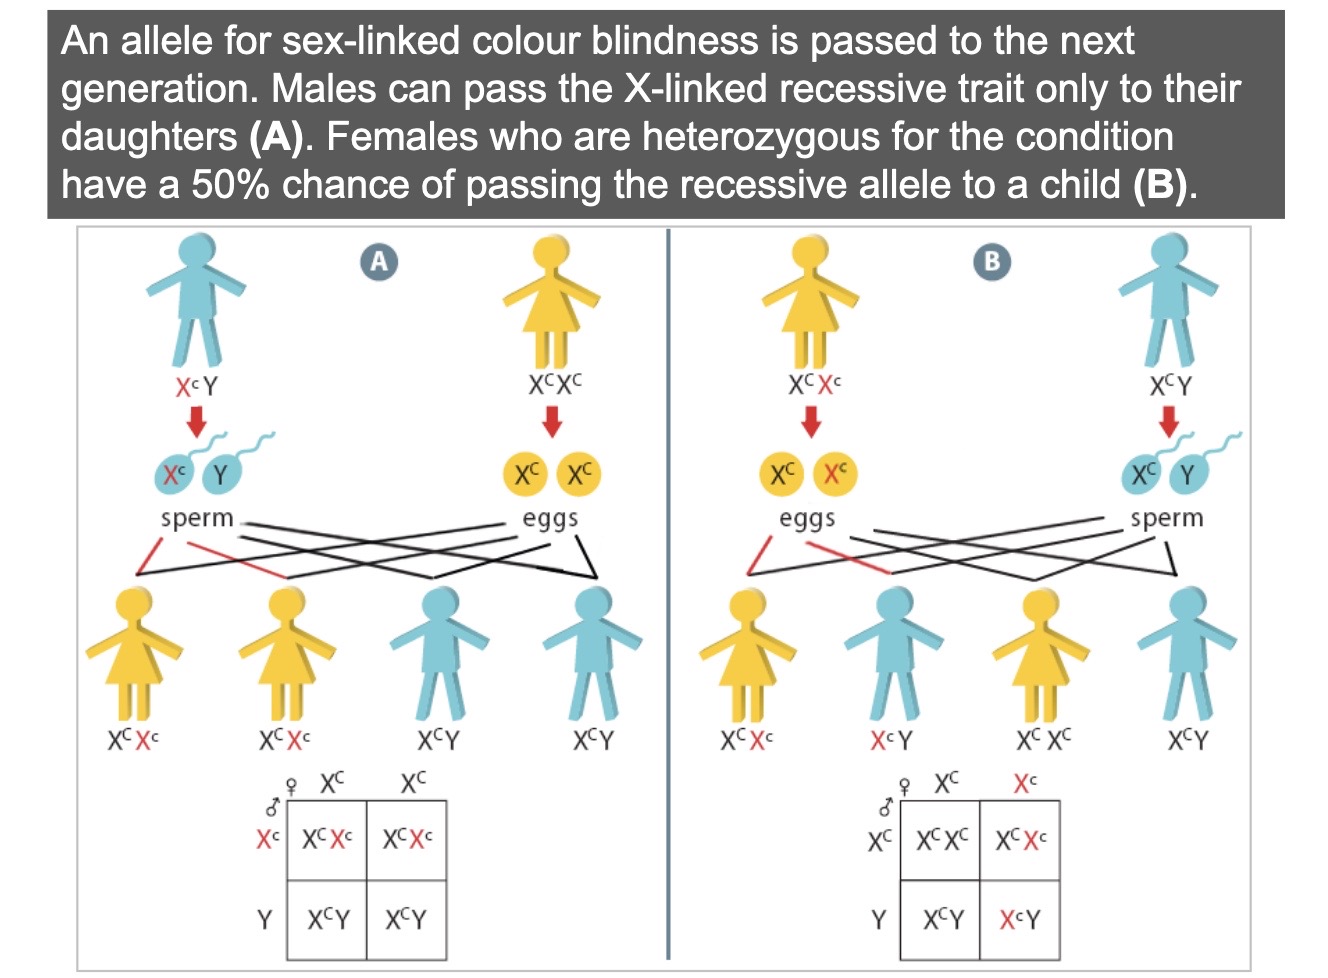 <p>Sex-linked inheritance refers to the inheritance of genes located on the sex chromosomes (X and Y). In humans, sex-linked conditions are typically associated with genes on the X chromosome.</p><p>One example of a sex-linked condition is color blindness, where the gene responsible for color vision is located on the X chromosome. See image for more details.</p>